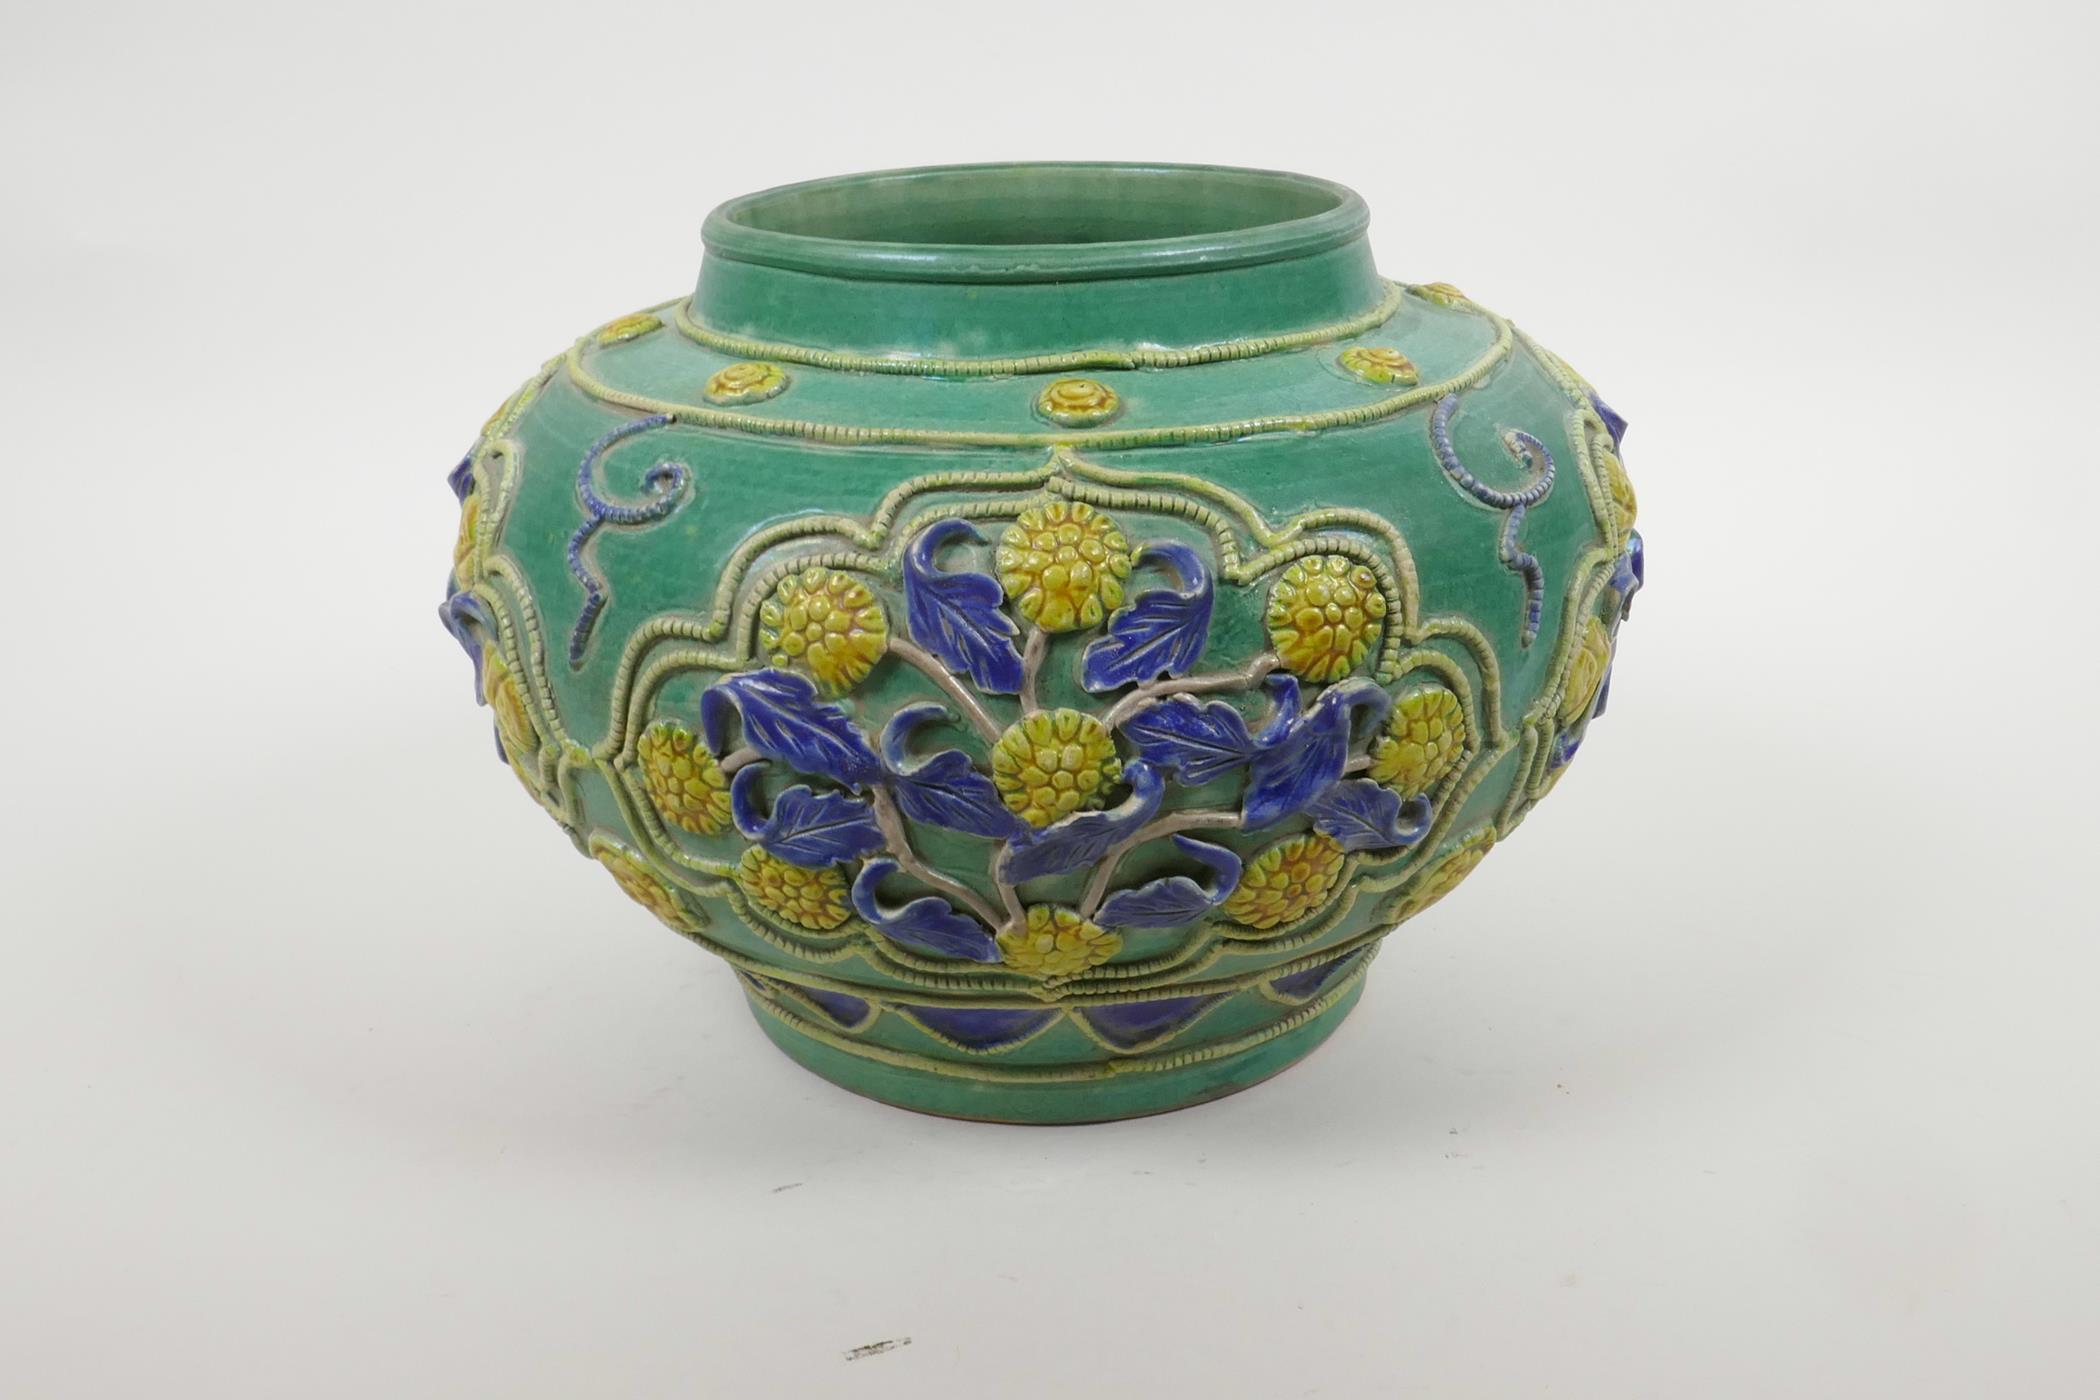 A Chinese green ground pottery vase with raised yellow and blue floral decoration, 9" diameter - Image 3 of 5